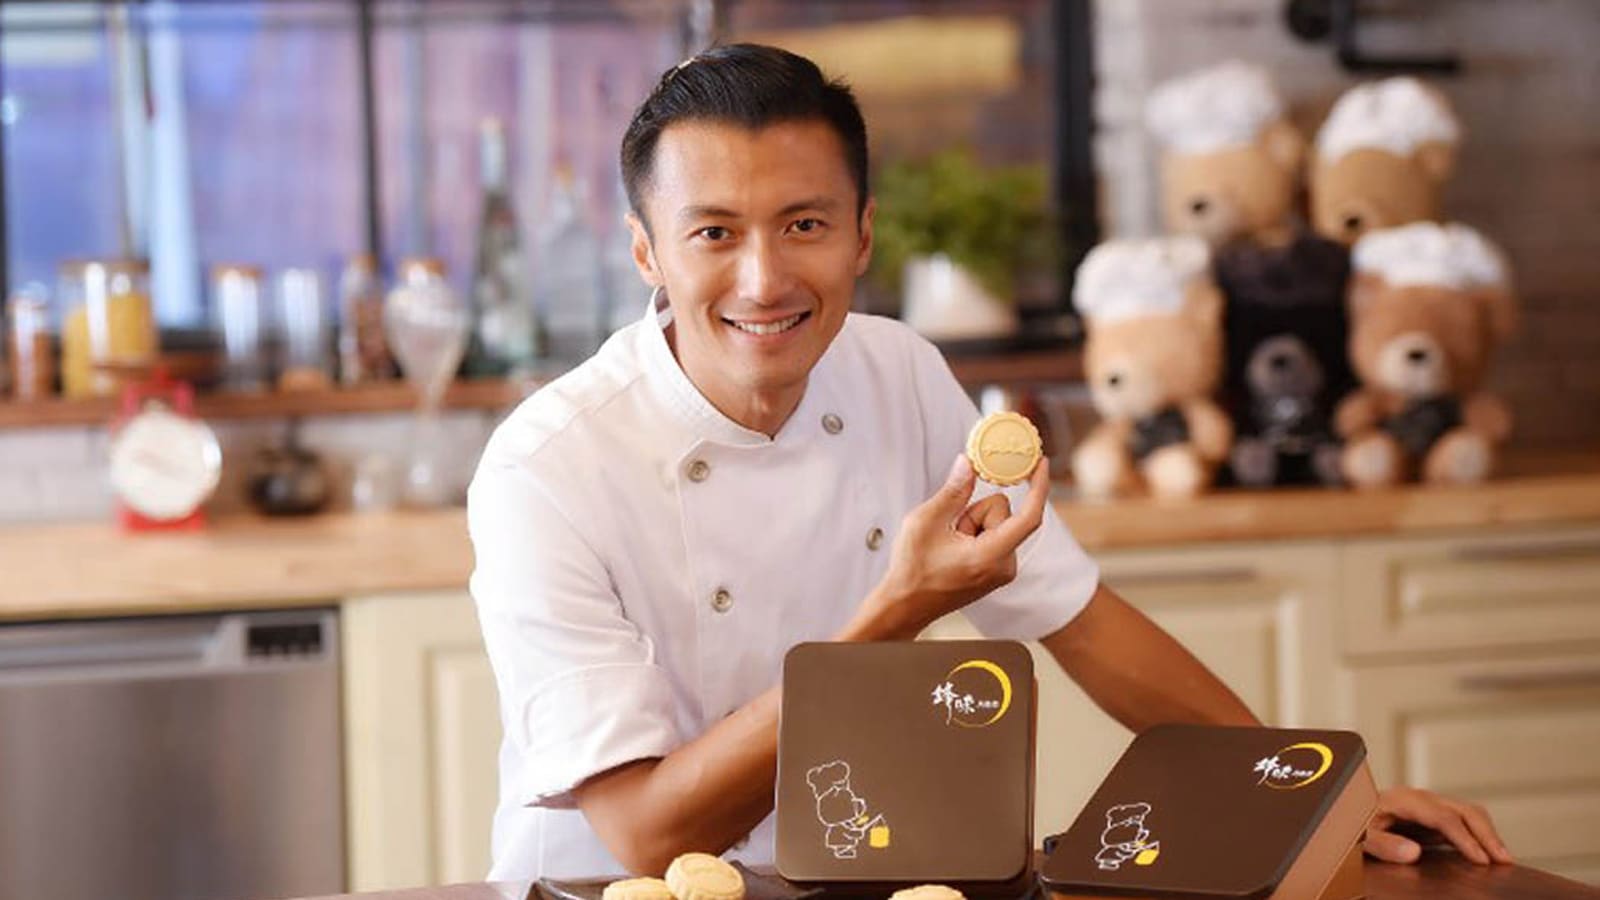 Nicholas Tse Is Closing All His Cookie Shops After Business Slumps Due To COVID-19 Outbreak